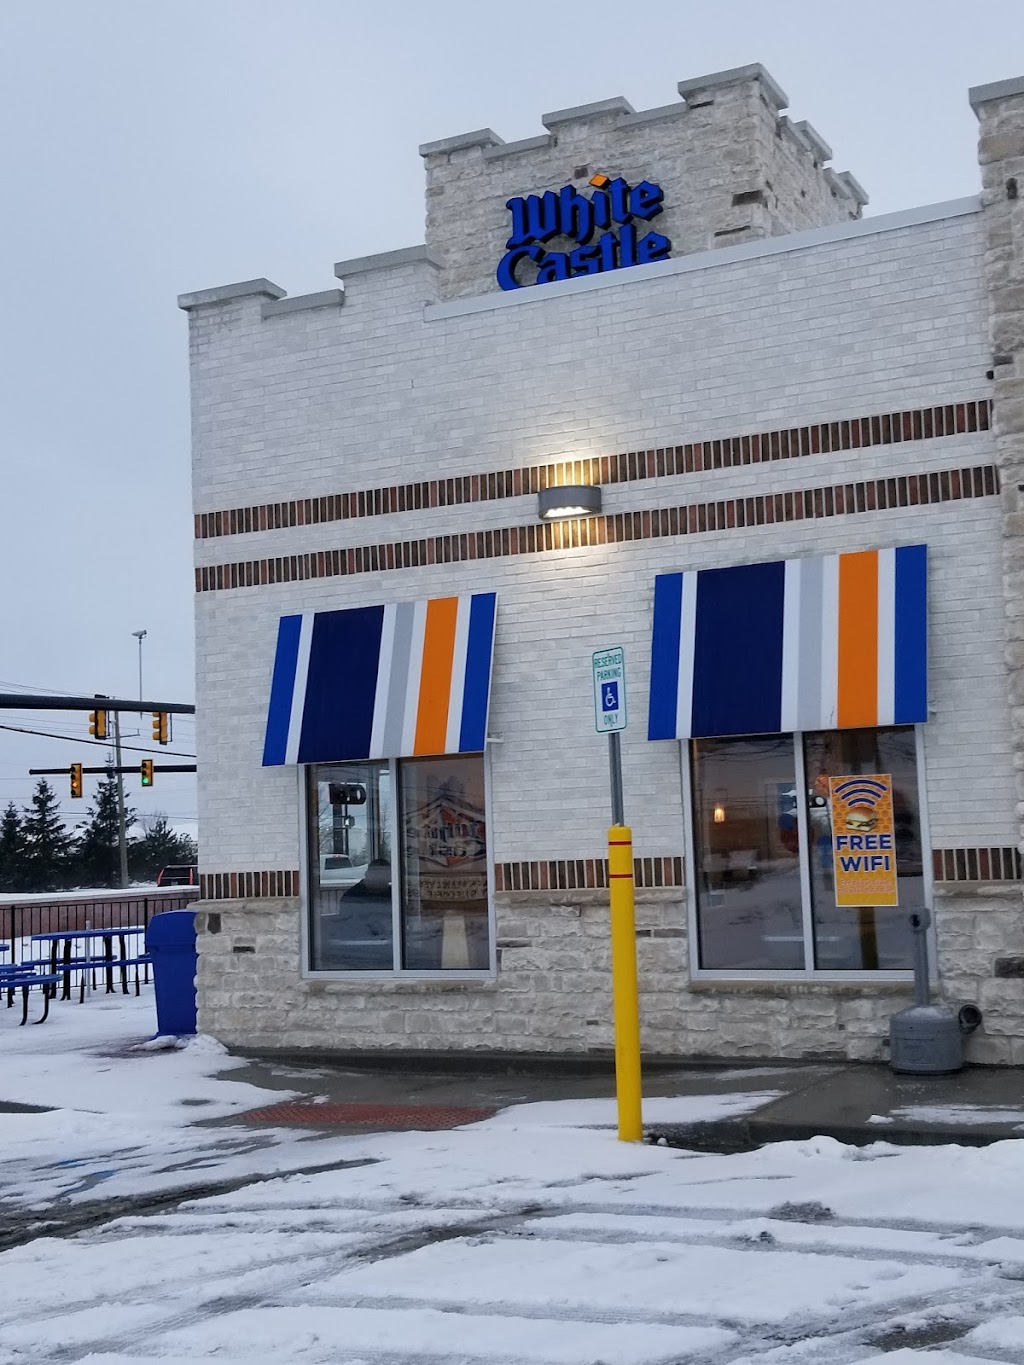 White Castle | 20090 West Rd, Woodhaven, MI 48183, USA | Phone: (734) 676-8415